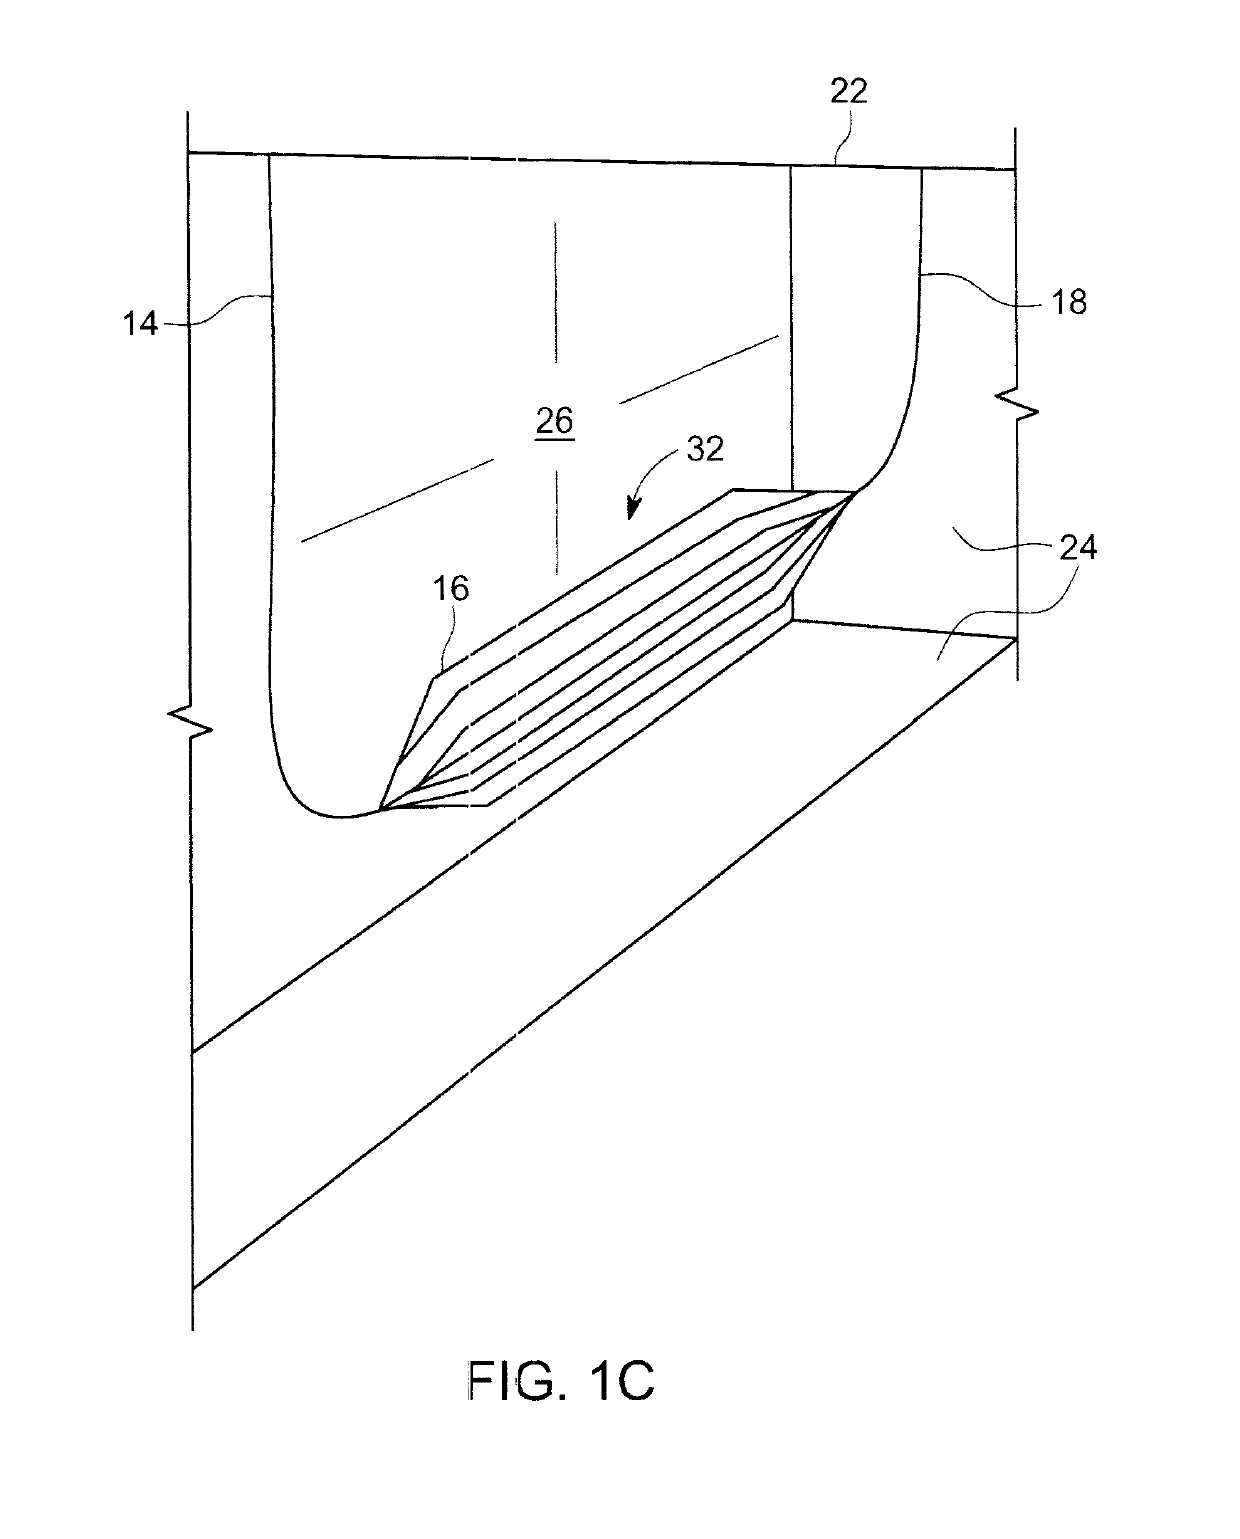 Method and apparatus for repurposing well sites for geothermal energy production